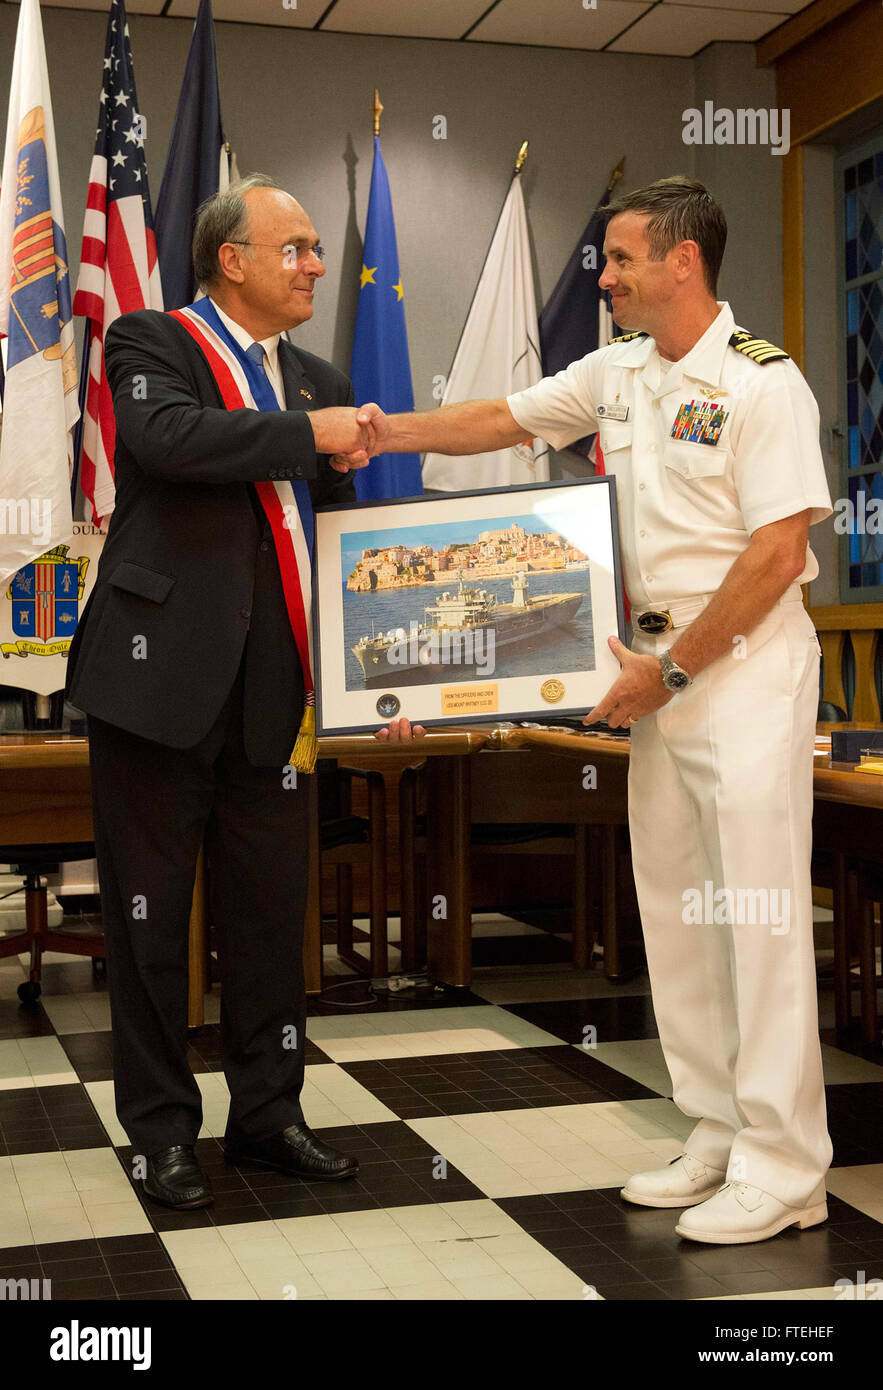 THEOULE-SUR-MER, France (August 14, 2013) –Daniel Mansanti, left, mayor of Theoule-sur-Mer, receives a photo from Capt. Craig Clapperton, commanding officer of the amphibious command ship USS Mount Whitney (LCC 20) during a gift exchange in recognition of the 69th anniversary celebration of allied troops landing in Provence during World War II. This visit serves to continue U.S. 6th Fleet efforts to build global maritime partnerships with European nations and improve maritime safety and security. Stock Photo